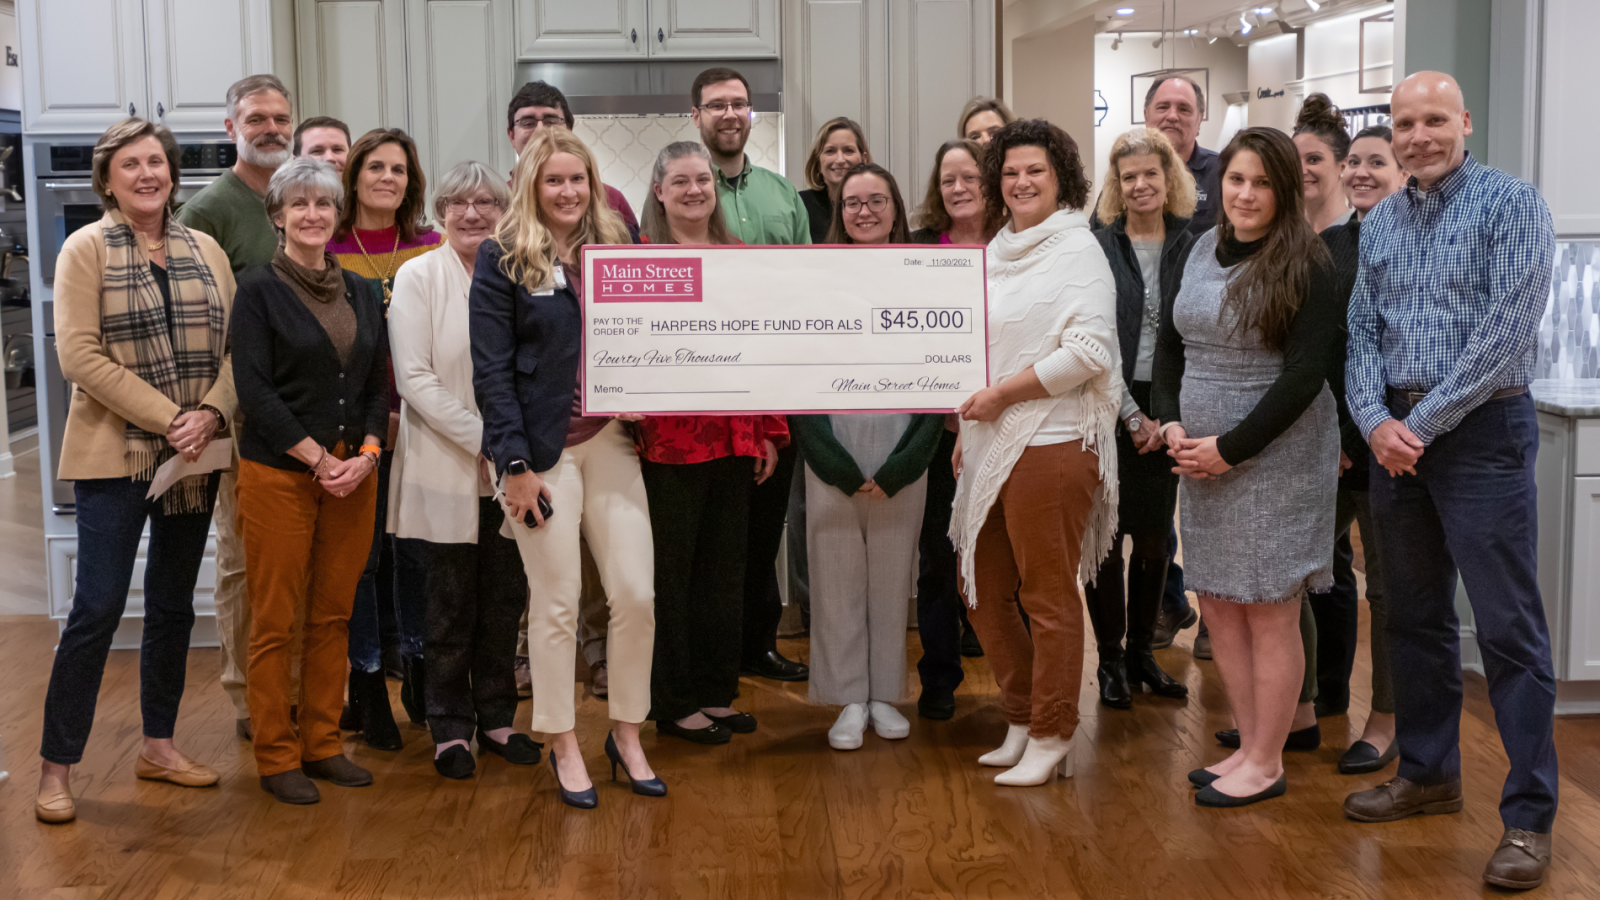 Harpers Hope group photo with check